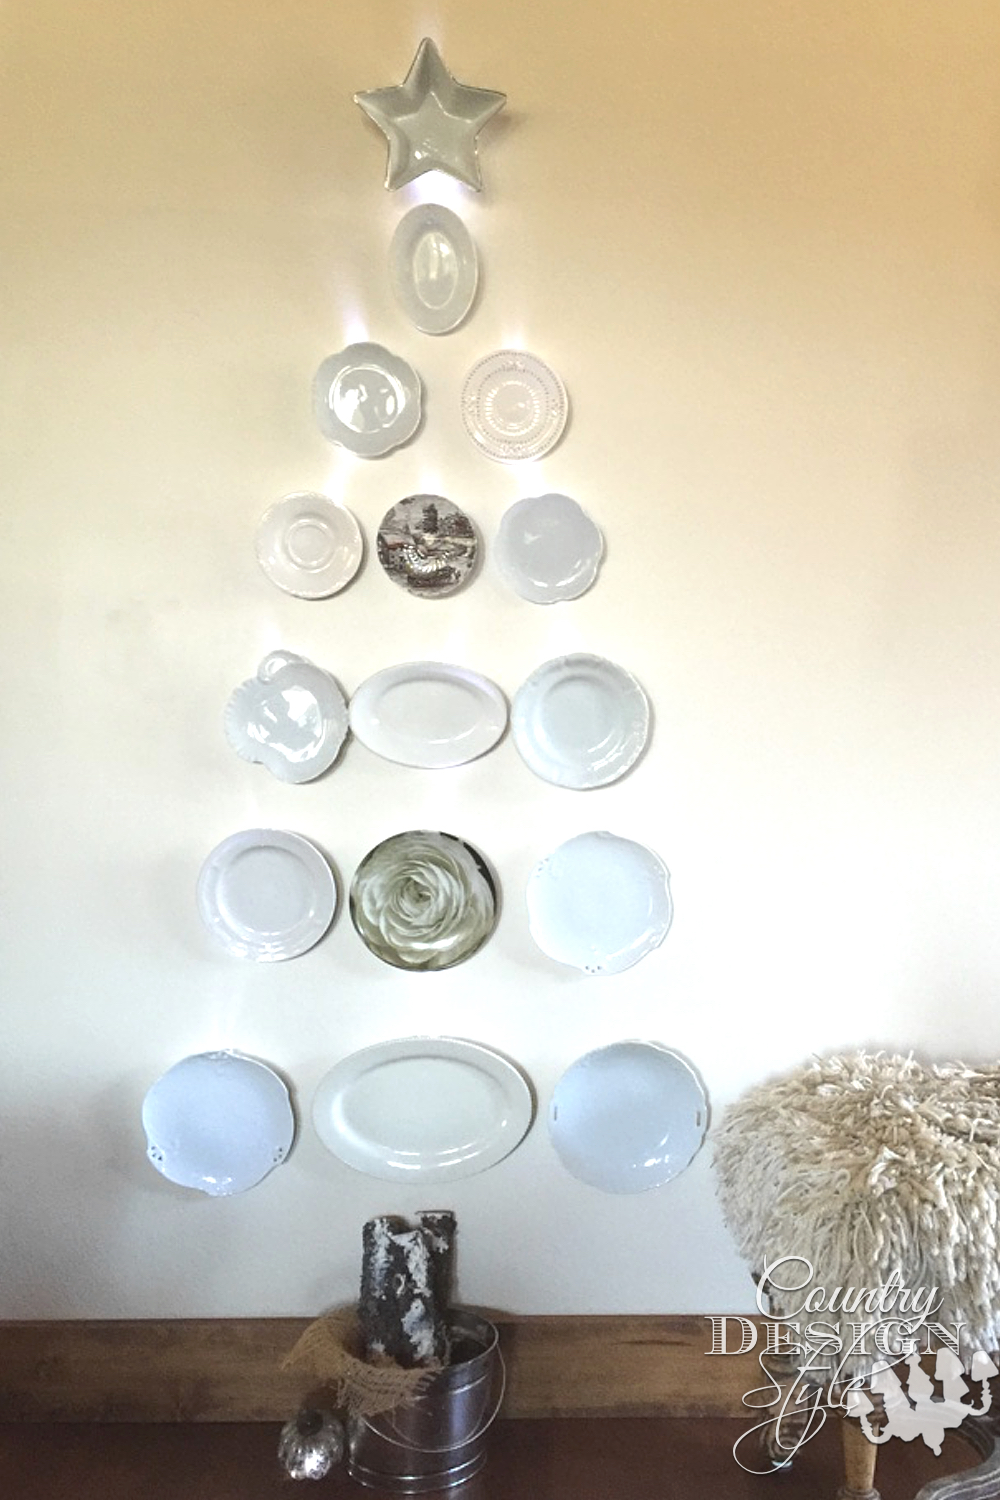 Make a Dish Christmas Tree | Country Design Style | countrydesignstyle.com pn